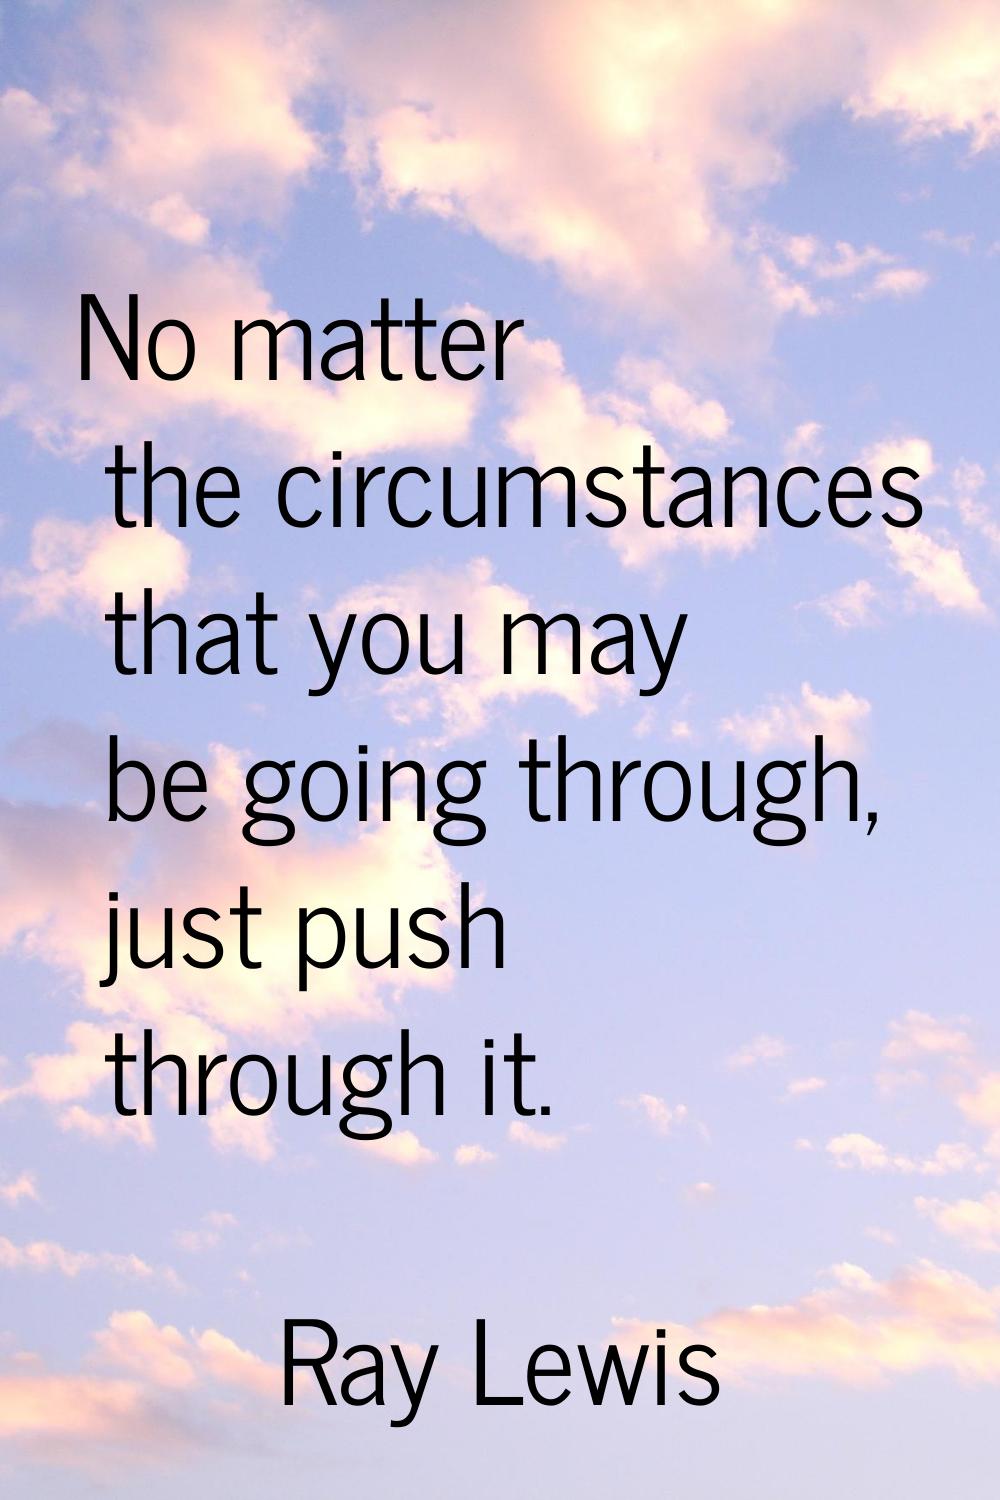 No matter the circumstances that you may be going through, just push through it.